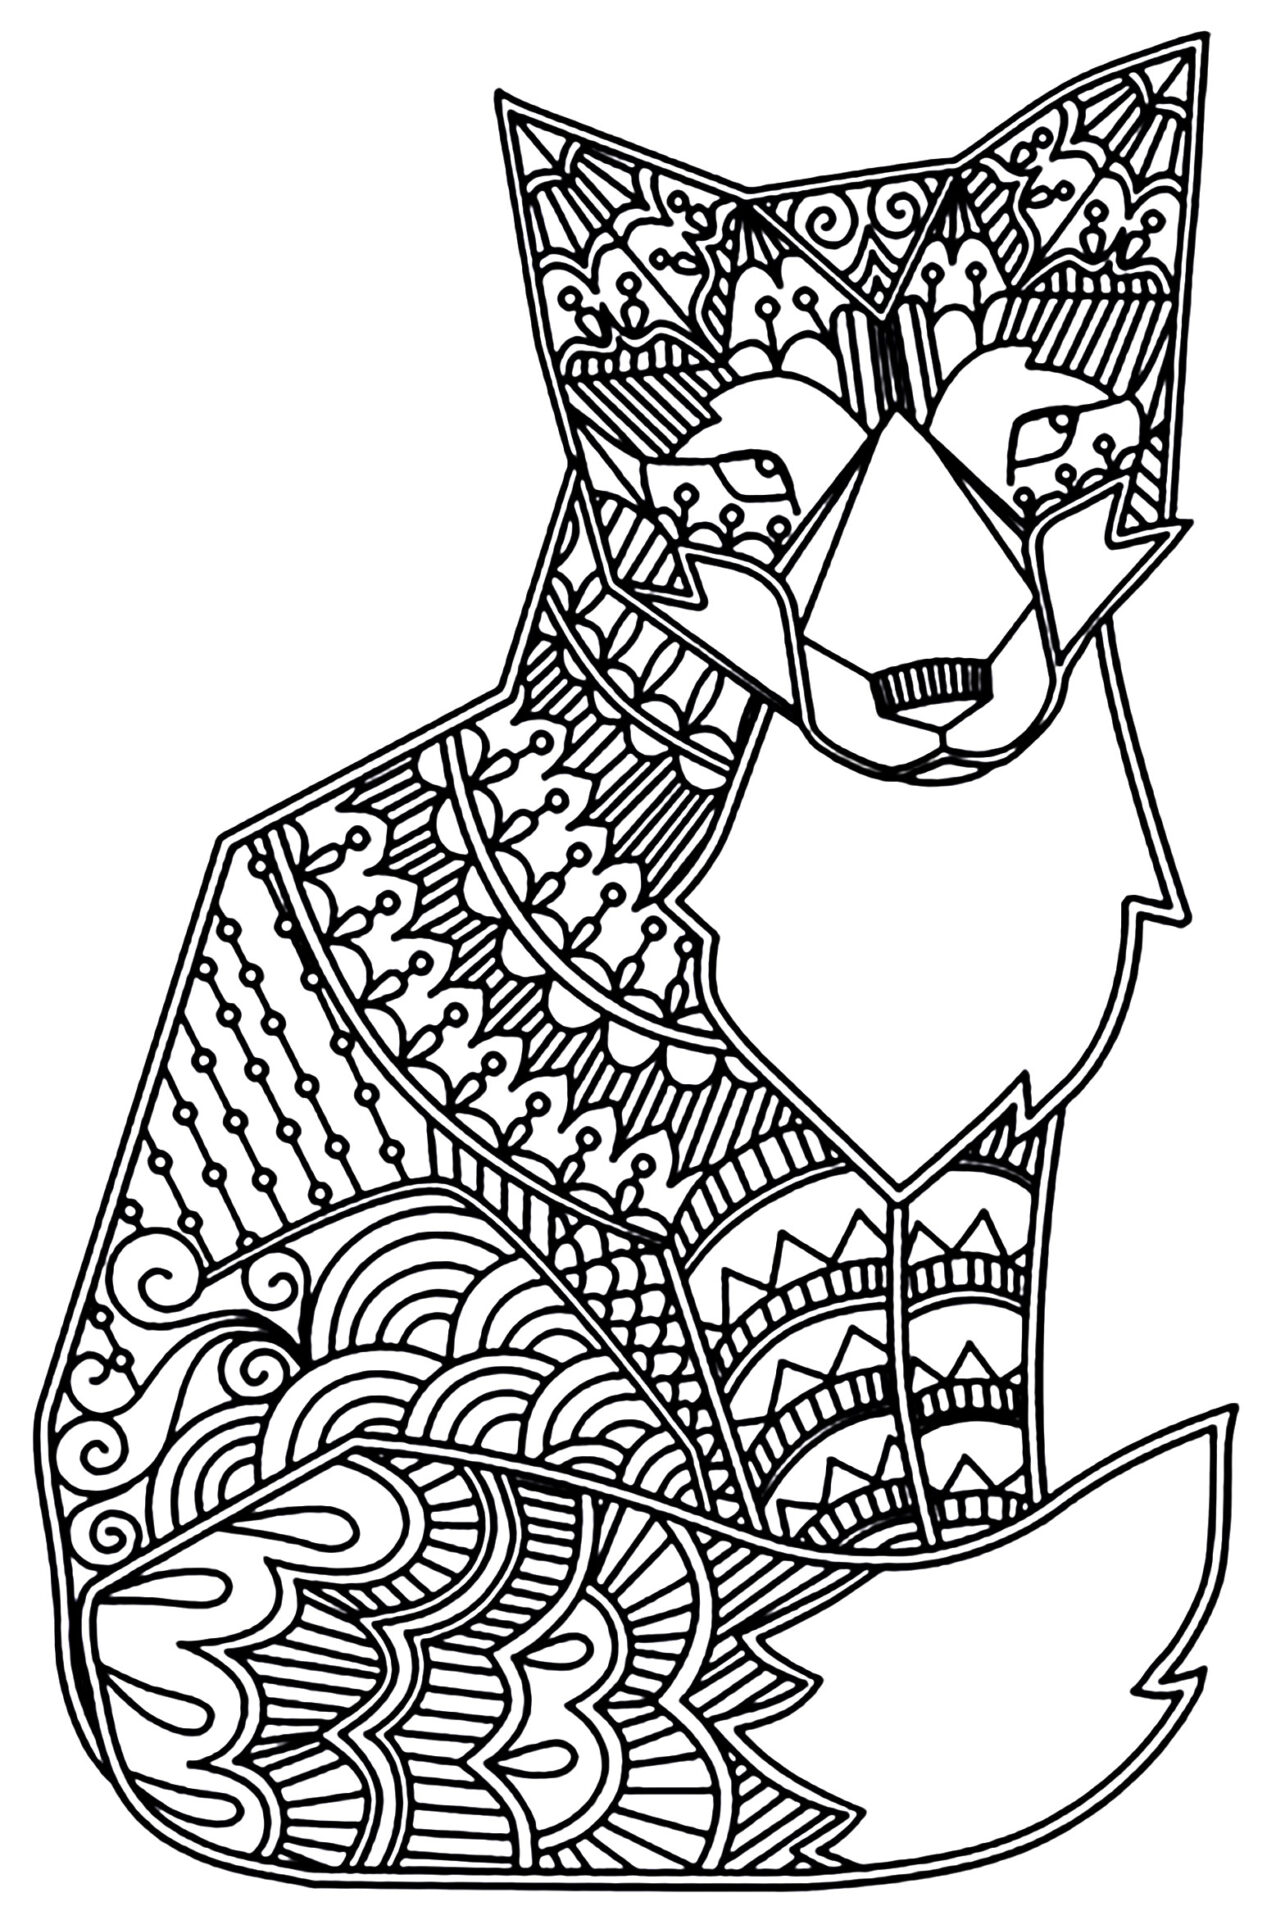 Download Mandala Fox Coloring Page Free Printable Coloring Pages For Kids